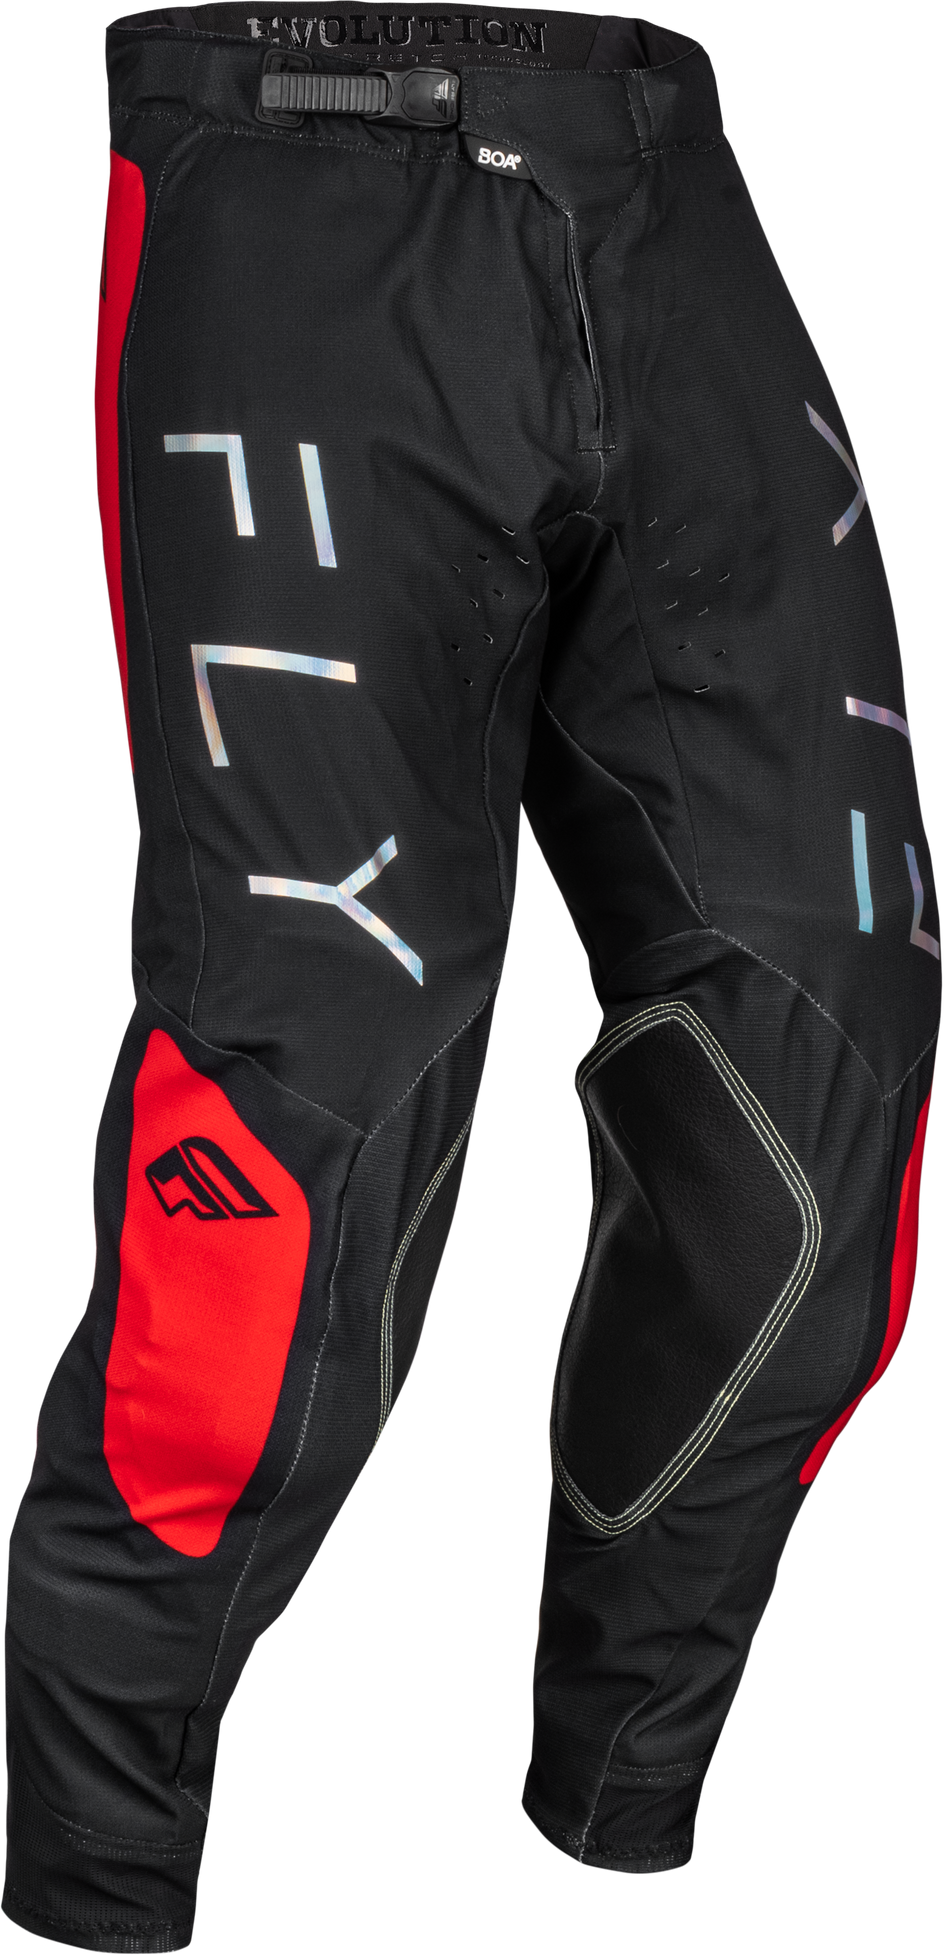 FLY RACING Evolution Dst Pants Black/Red Sz 32 377-13032